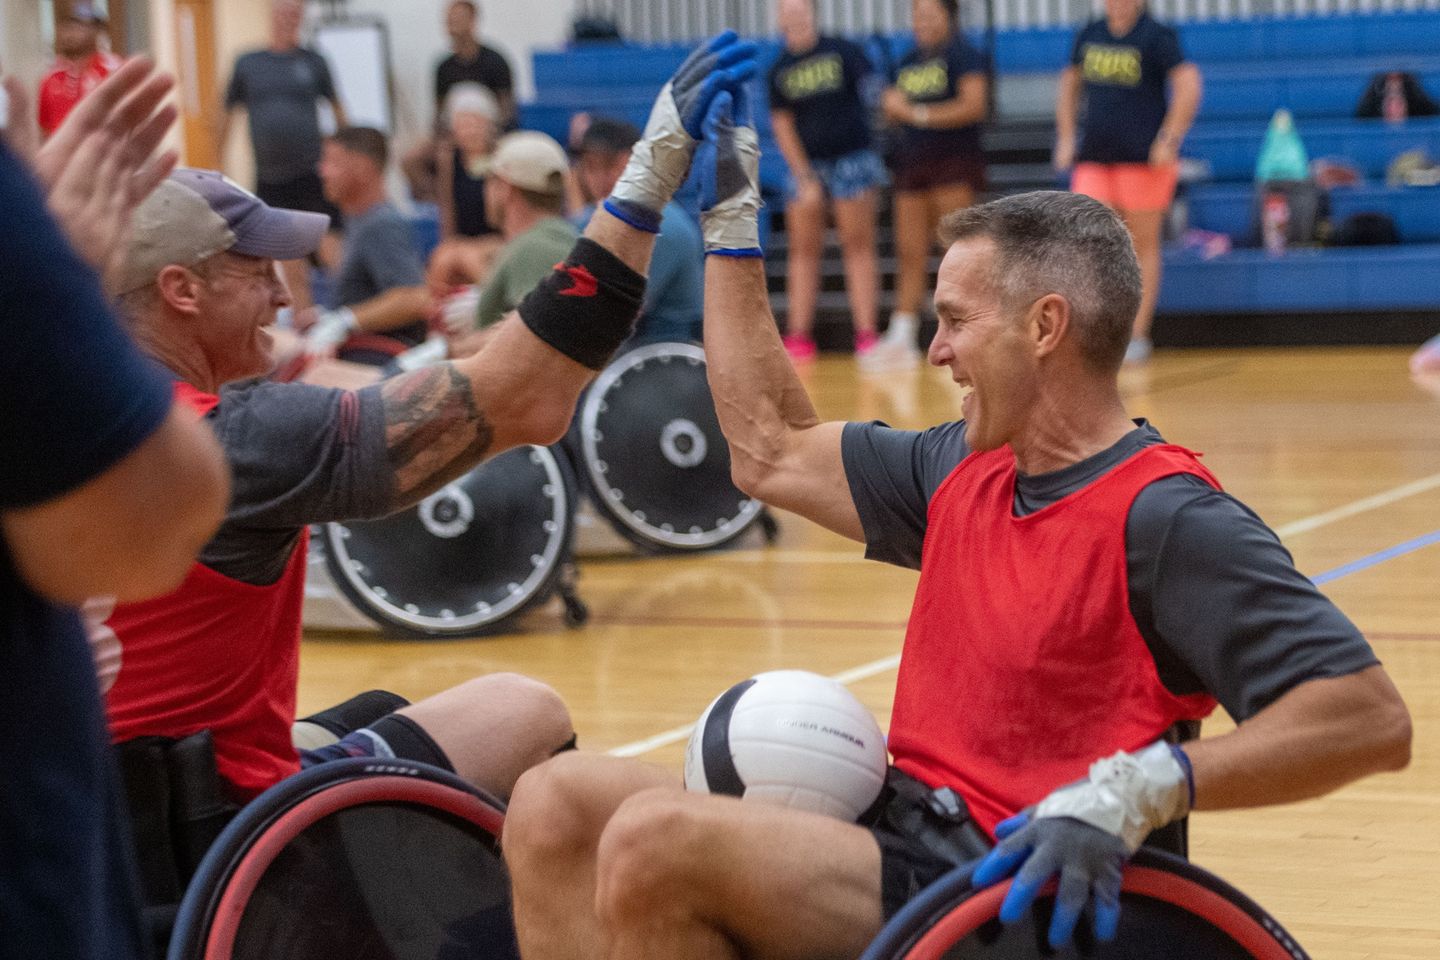 General Clarke experiences the sport of wheelchair rugby